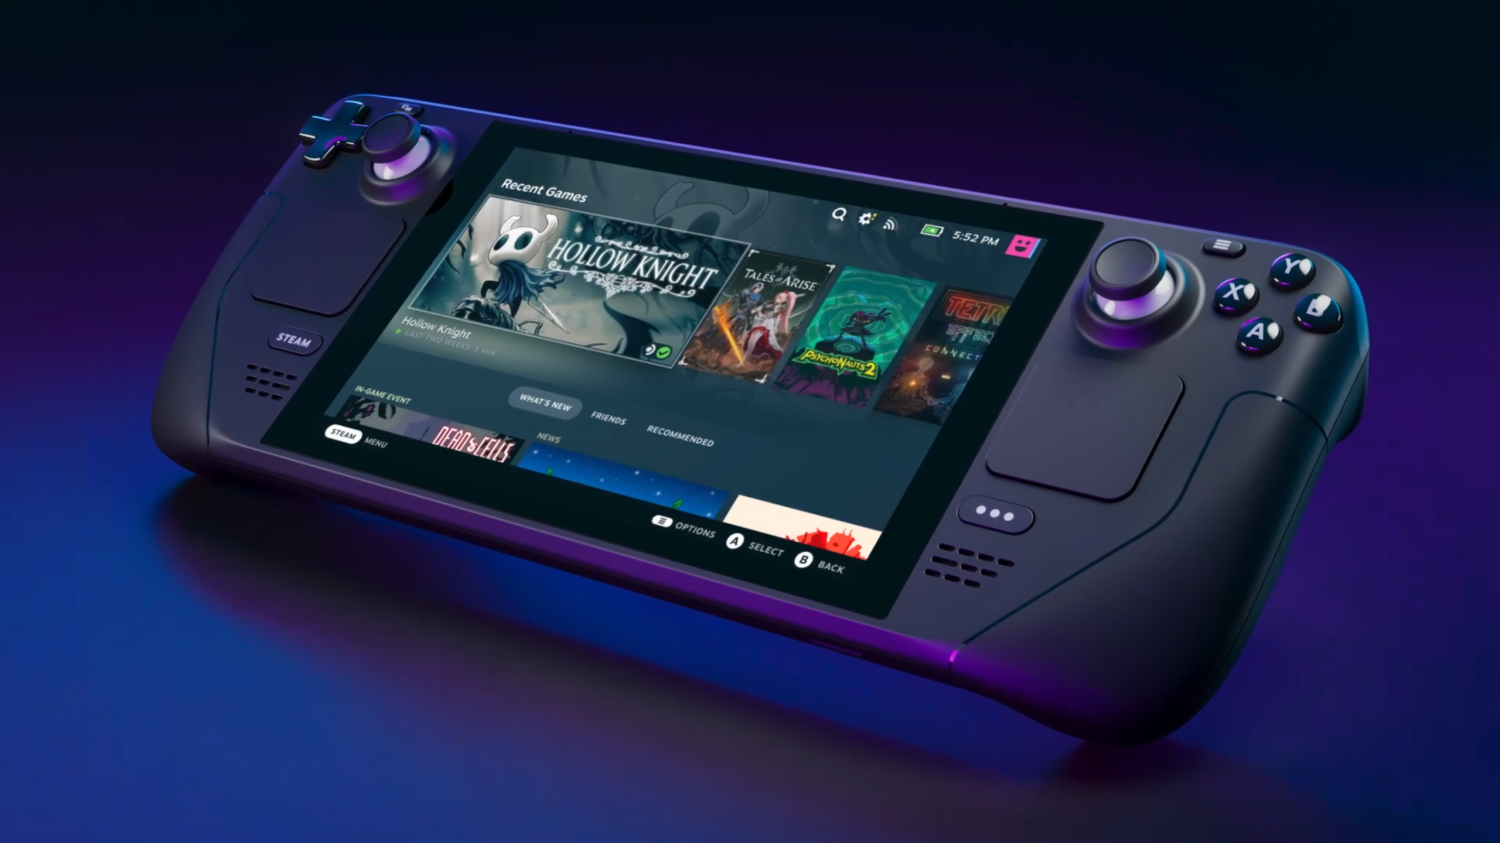 Steam Deck, its docking station and FIFA 23 topped the Steam sales